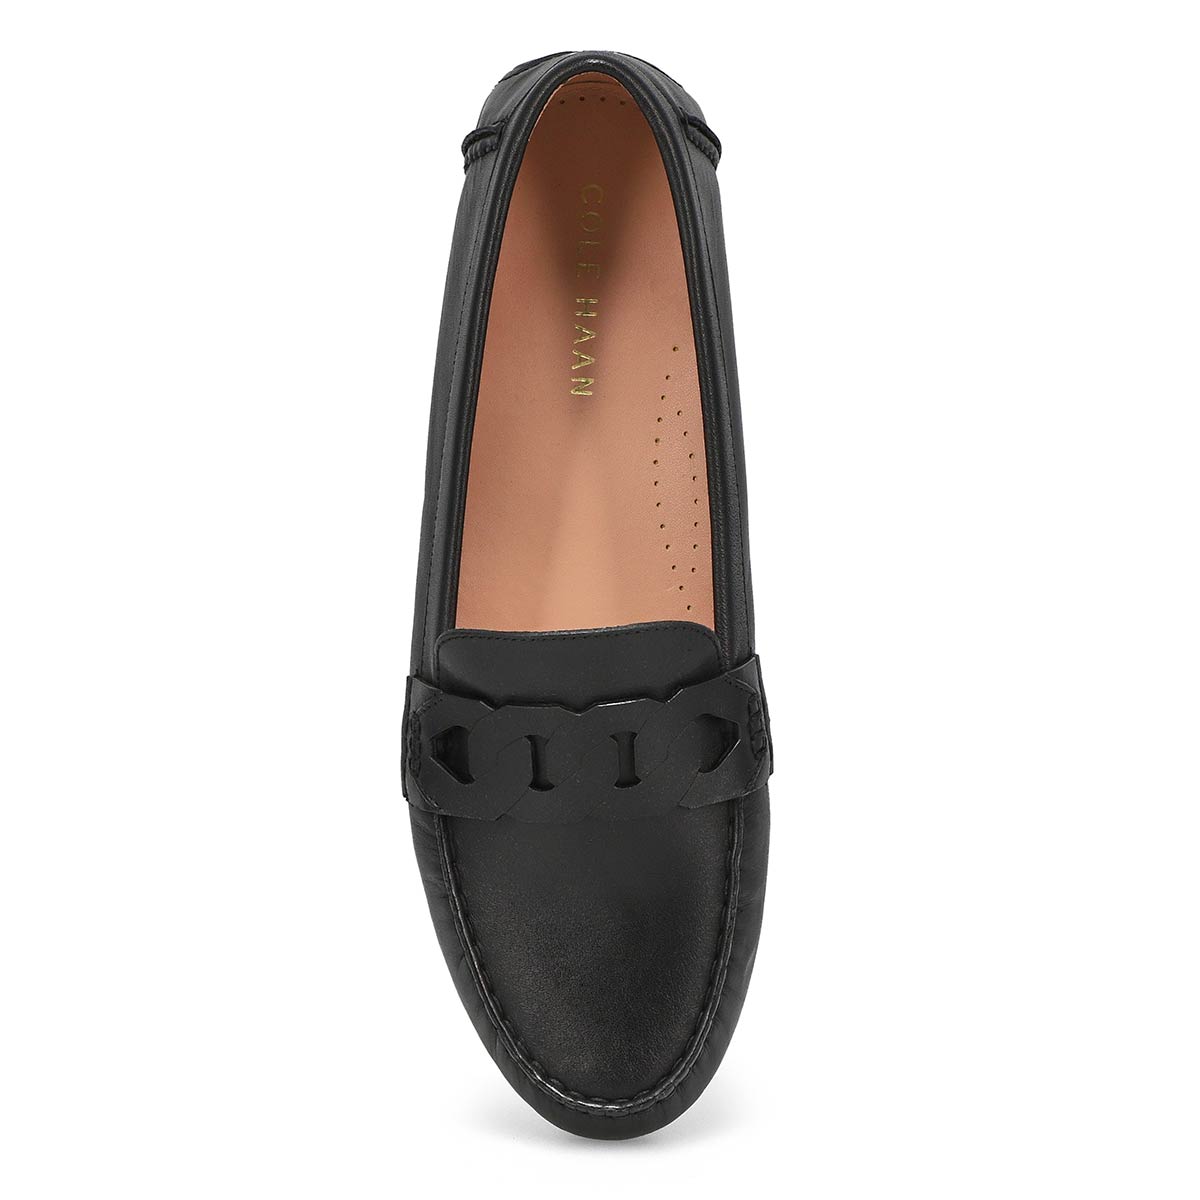 Cole Haan Women's Evelyn Chain Driver Casual | SoftMoc.com